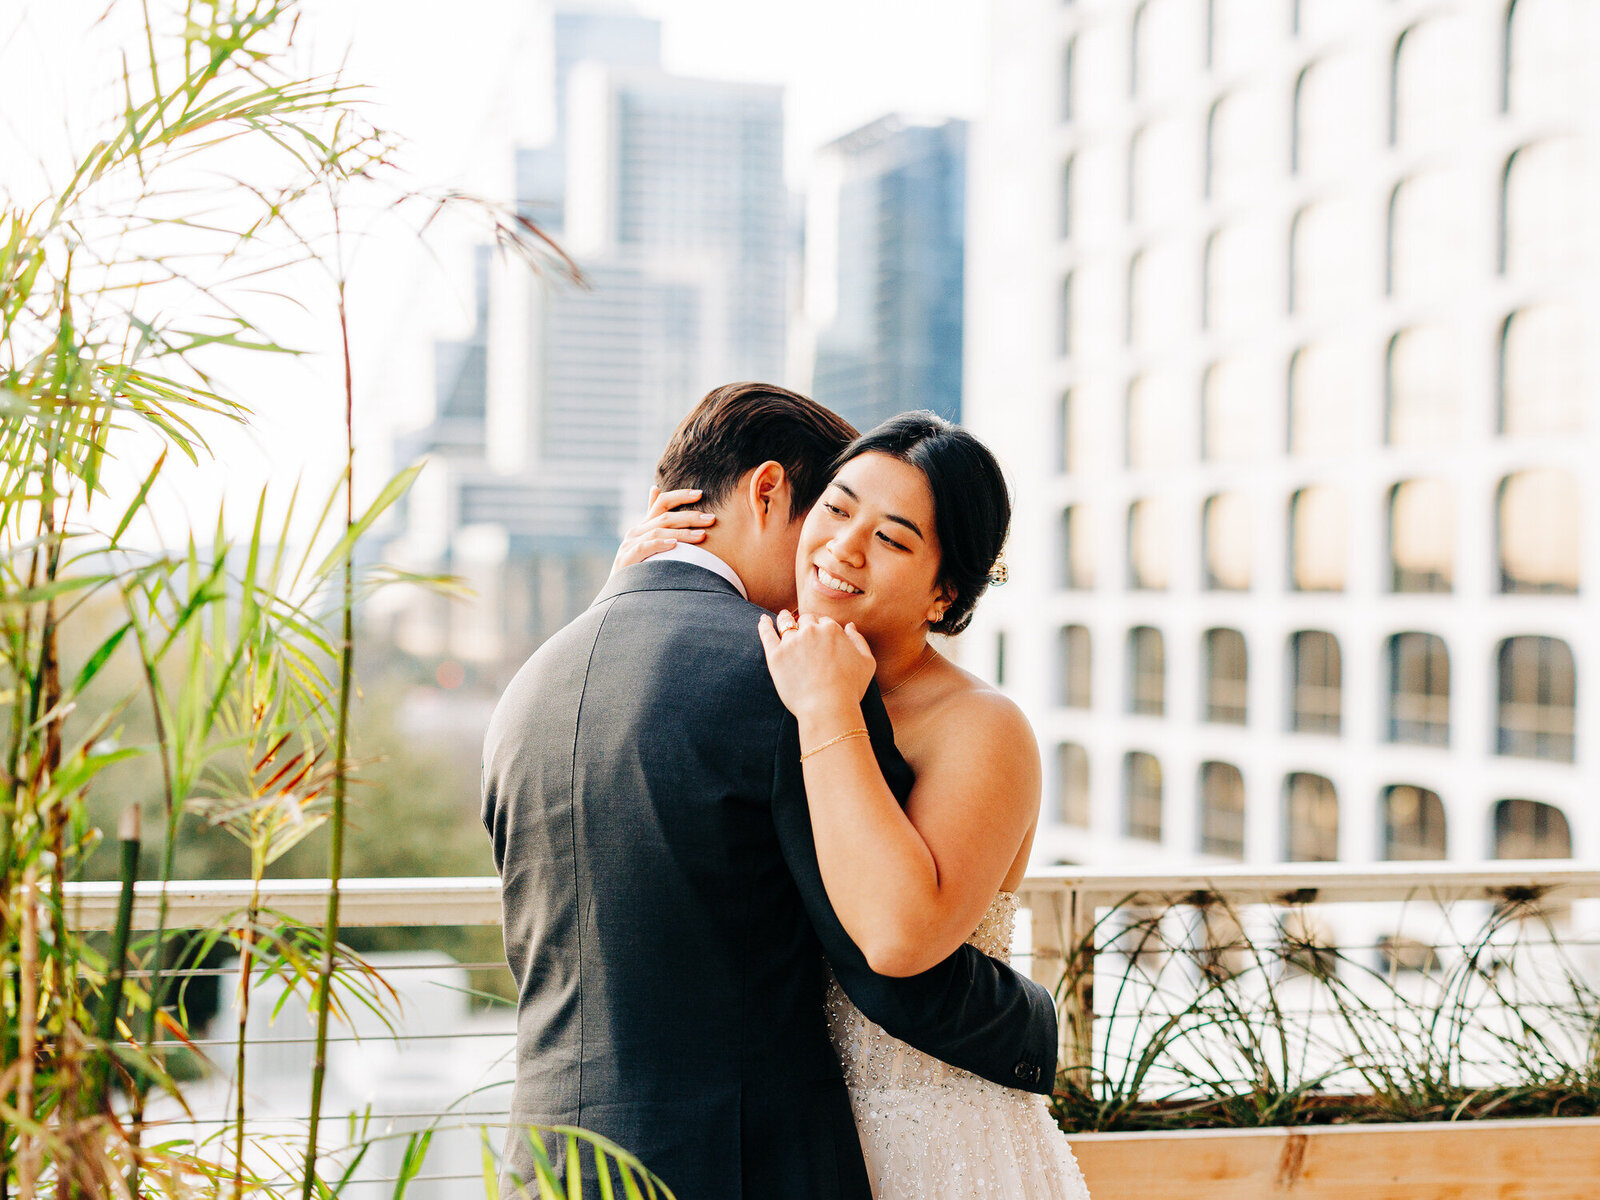 This image features a Vietnamese couple at The Line Hotel in their wedding attire. The groom is wrapping around his bride at the waist as she wraps around him, resting one hand on his shoulder and the other on the back of his neck. The groom is softly kissing her neck. The image was taken by Austin Wedding Photographer KD Captures.